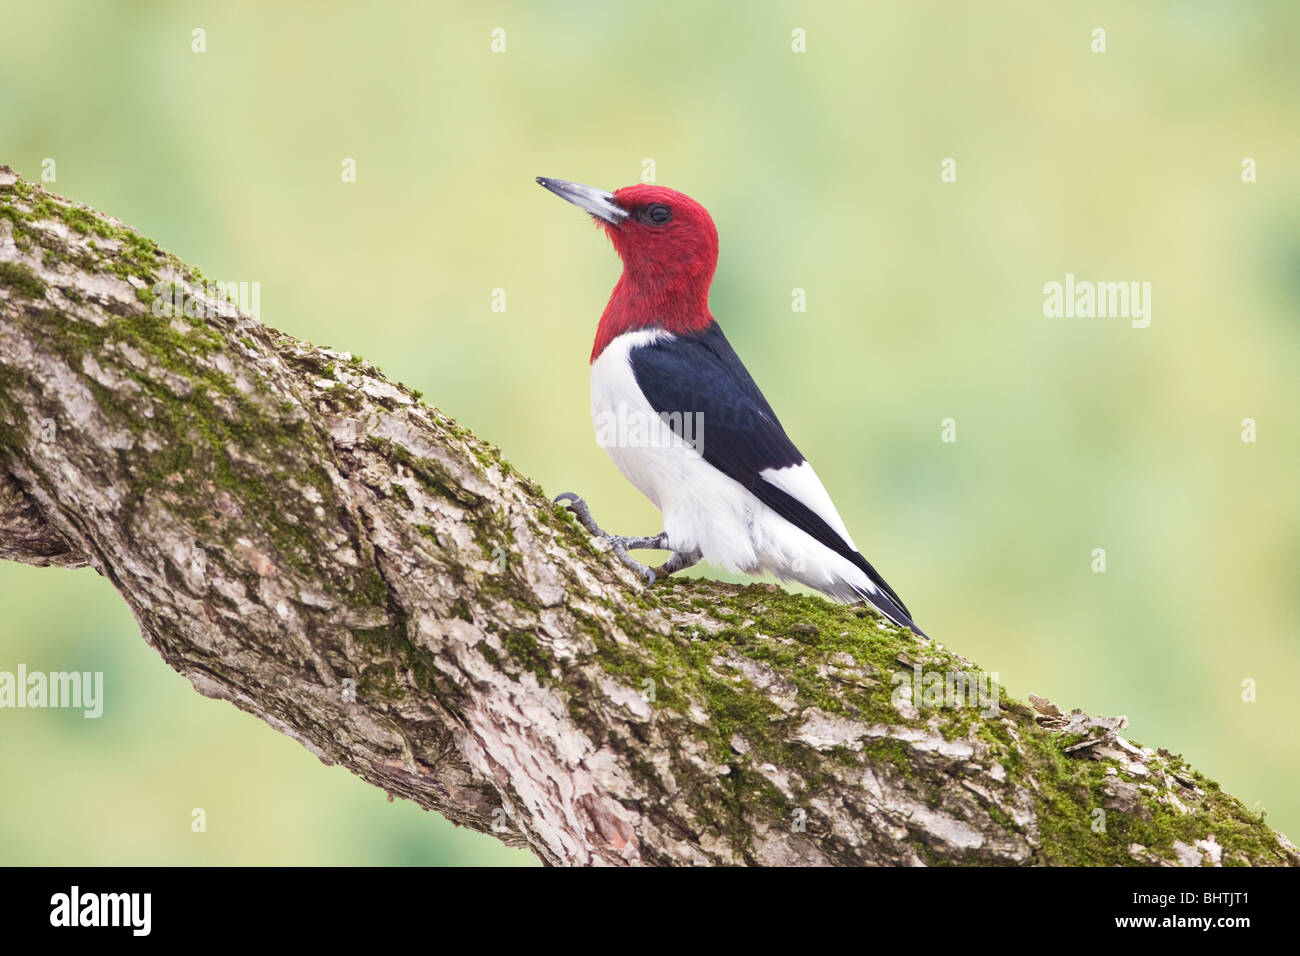 Red-headed Woodpecker perched on Twisted Vine Stock Photo